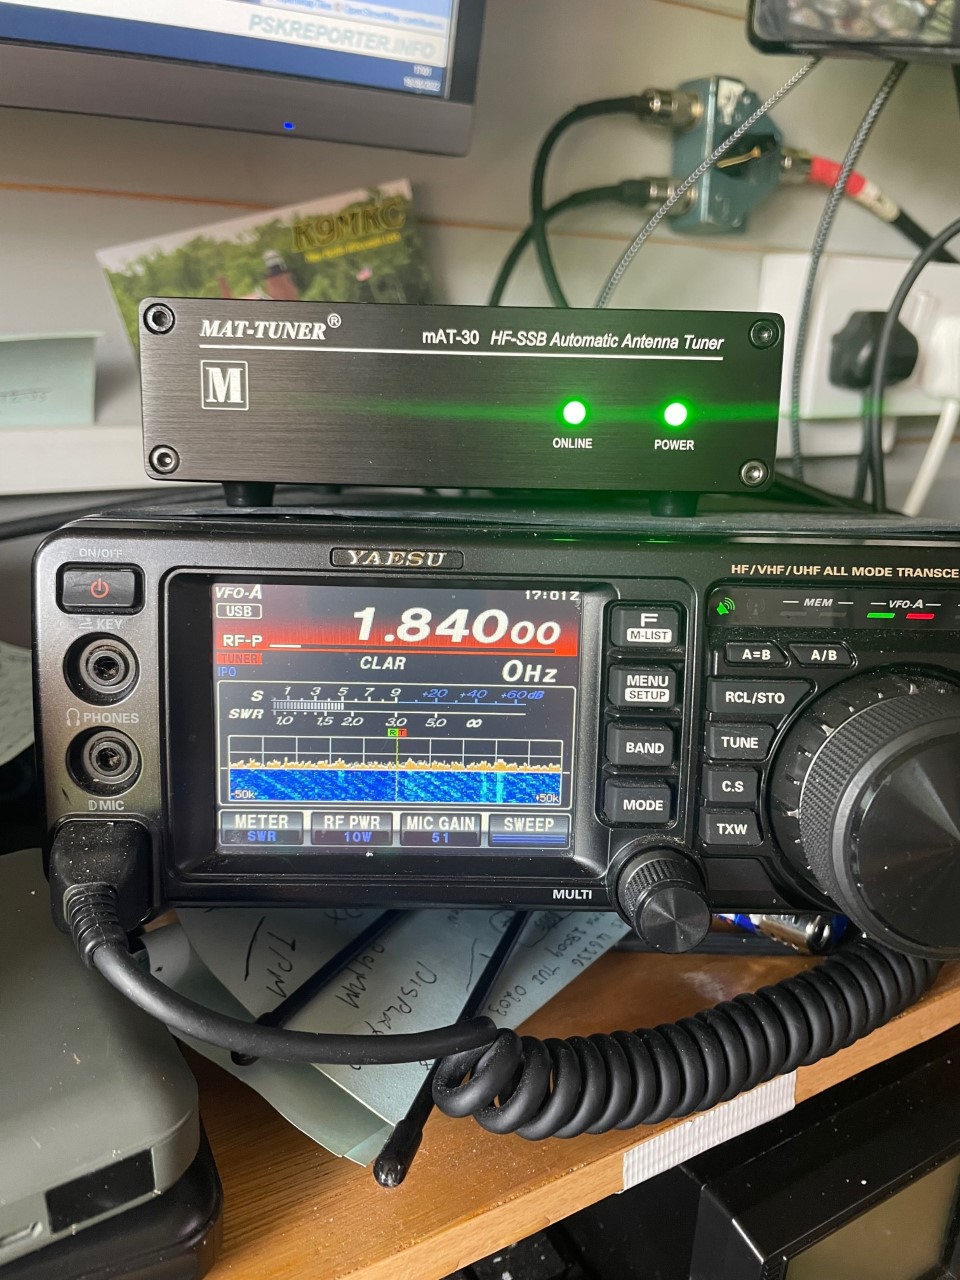 Homebrew ATU for 160m with a way too short antenna! Extern10